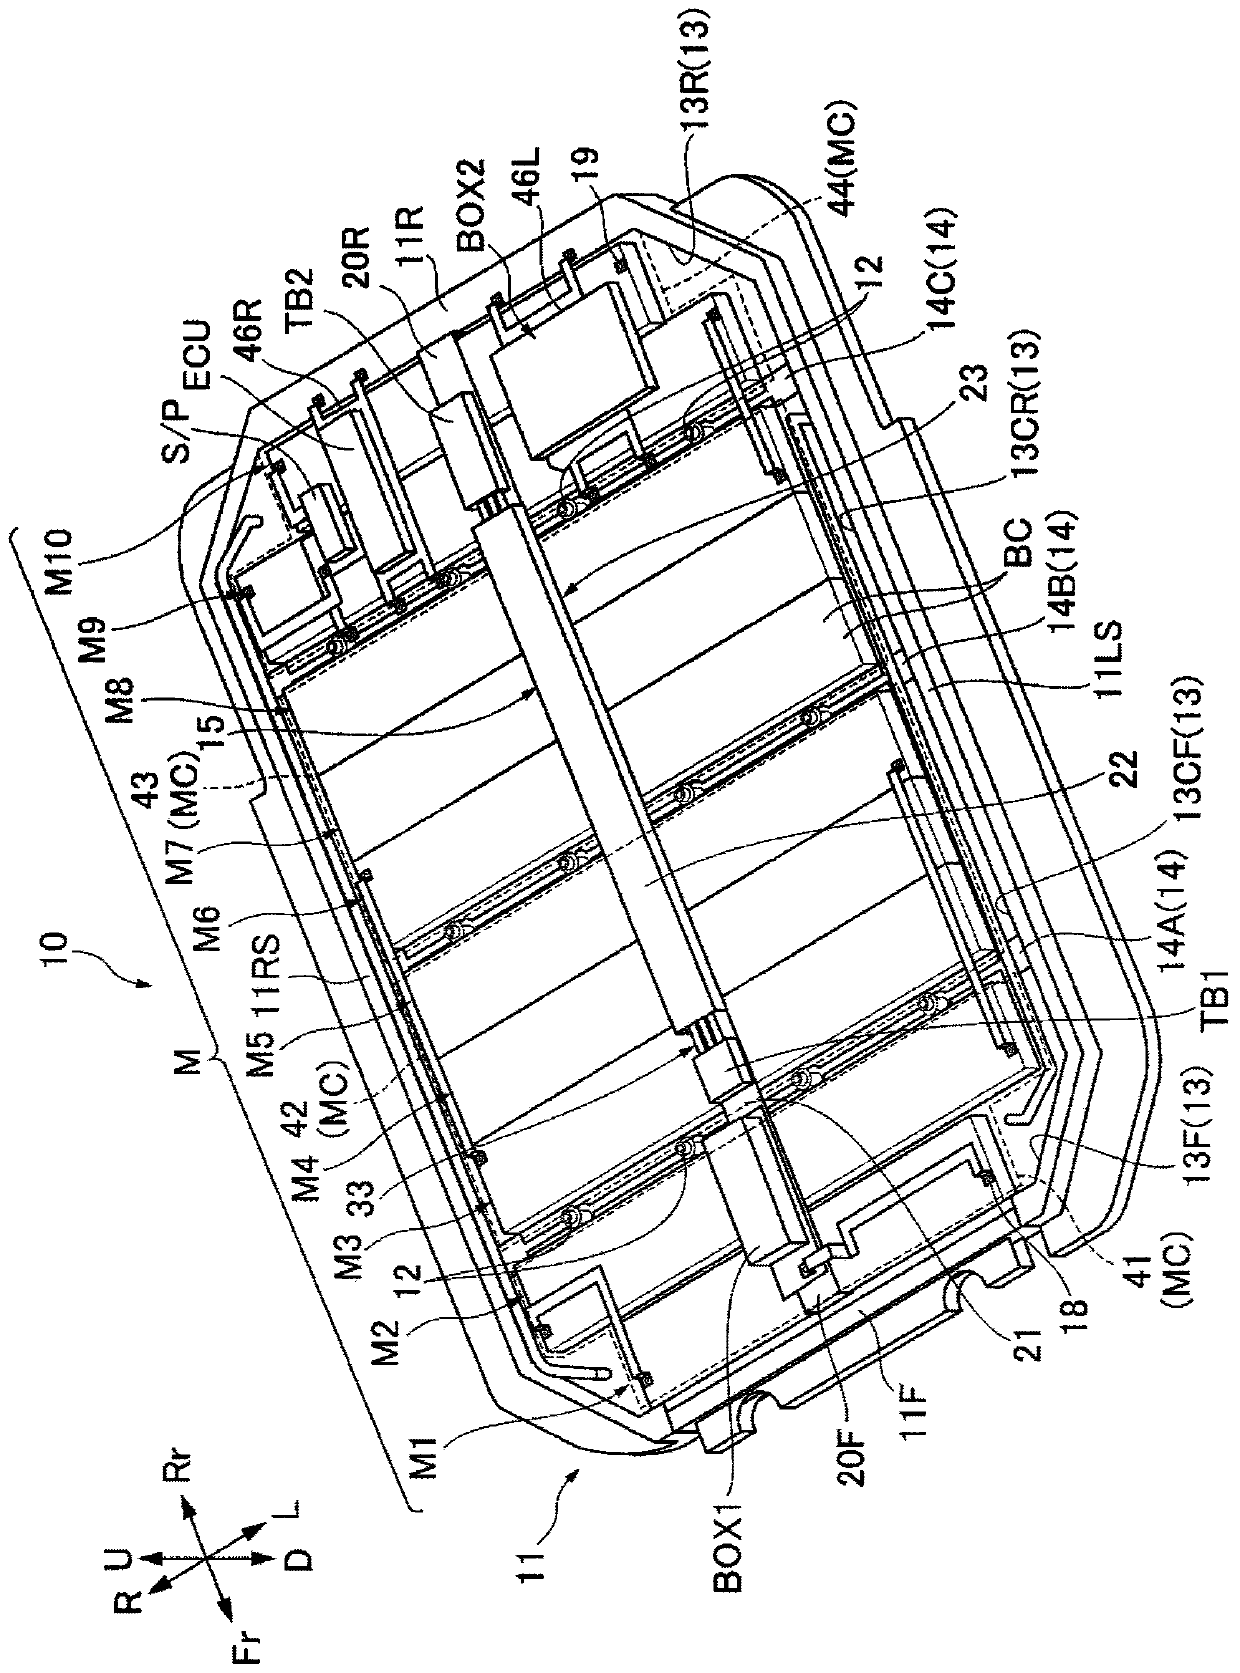 Battery unit for vehicle